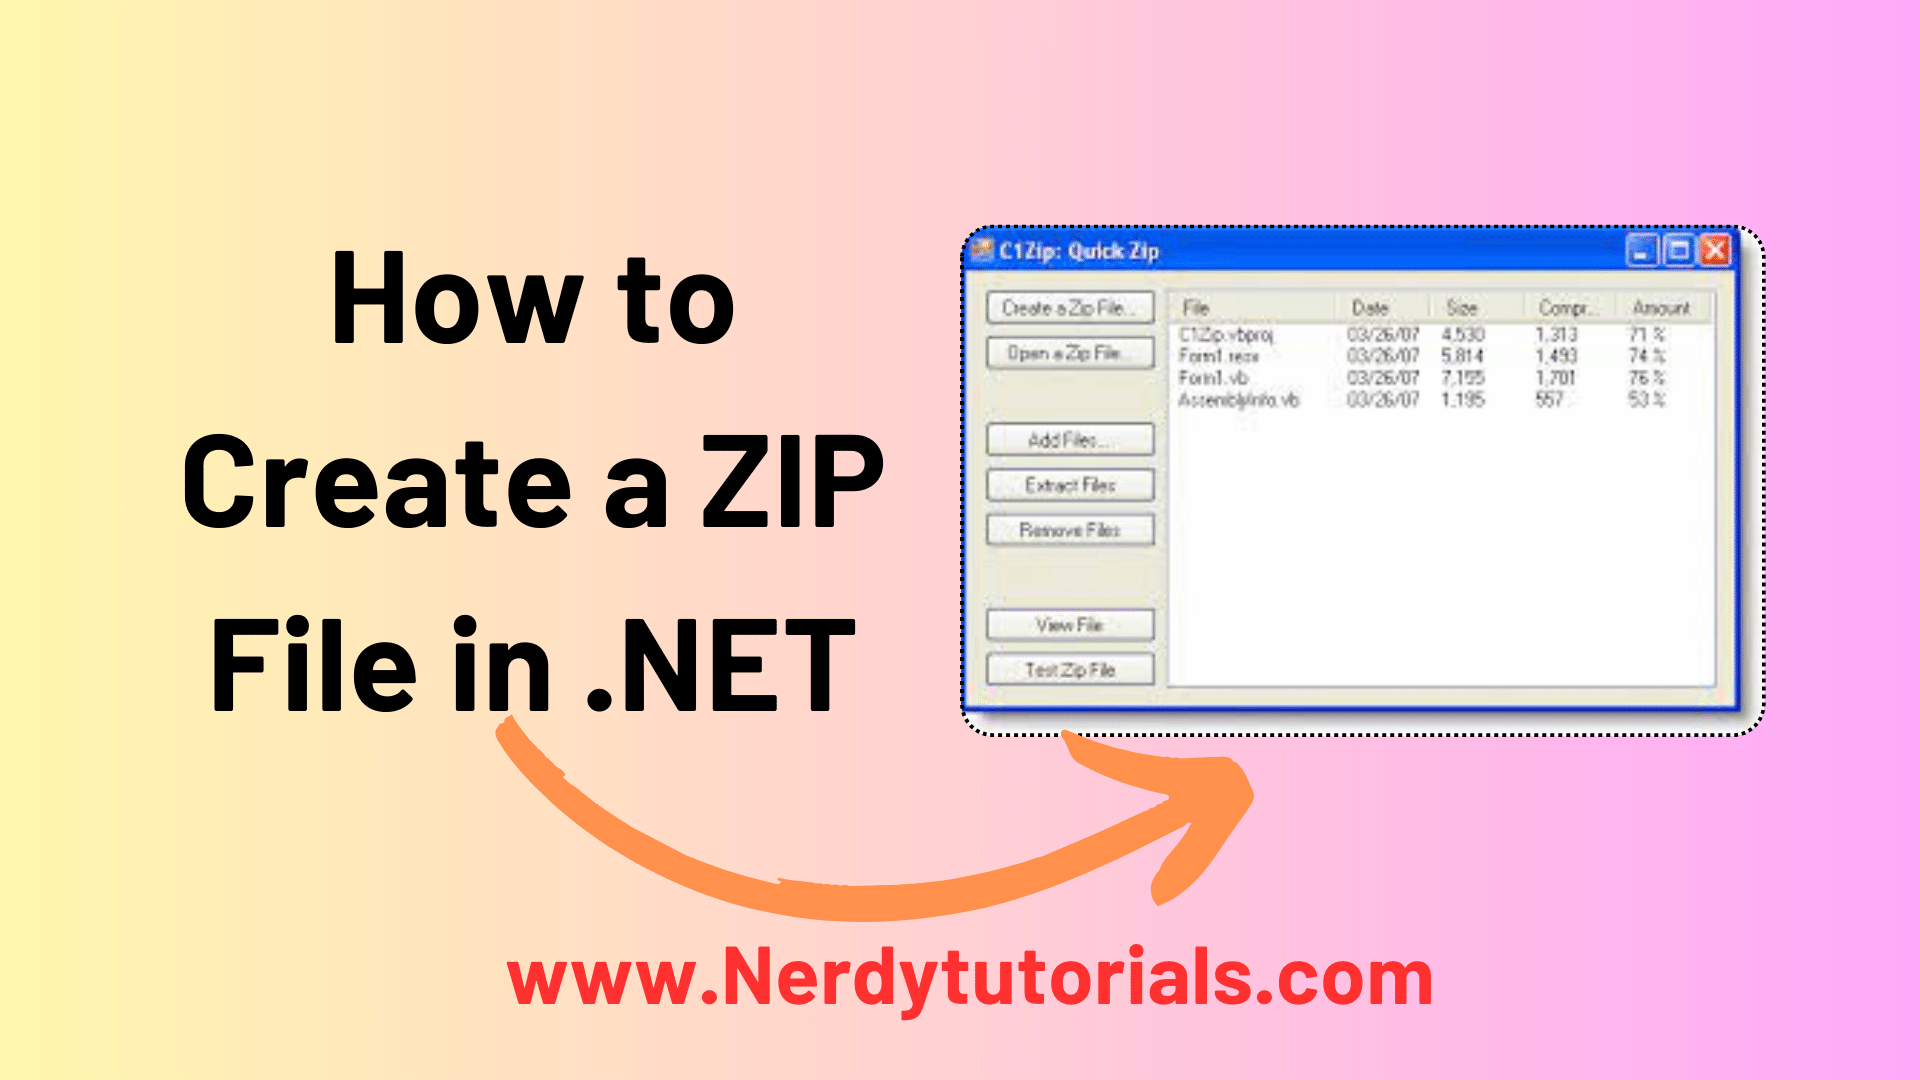 How to Create a ZIP File in .NET